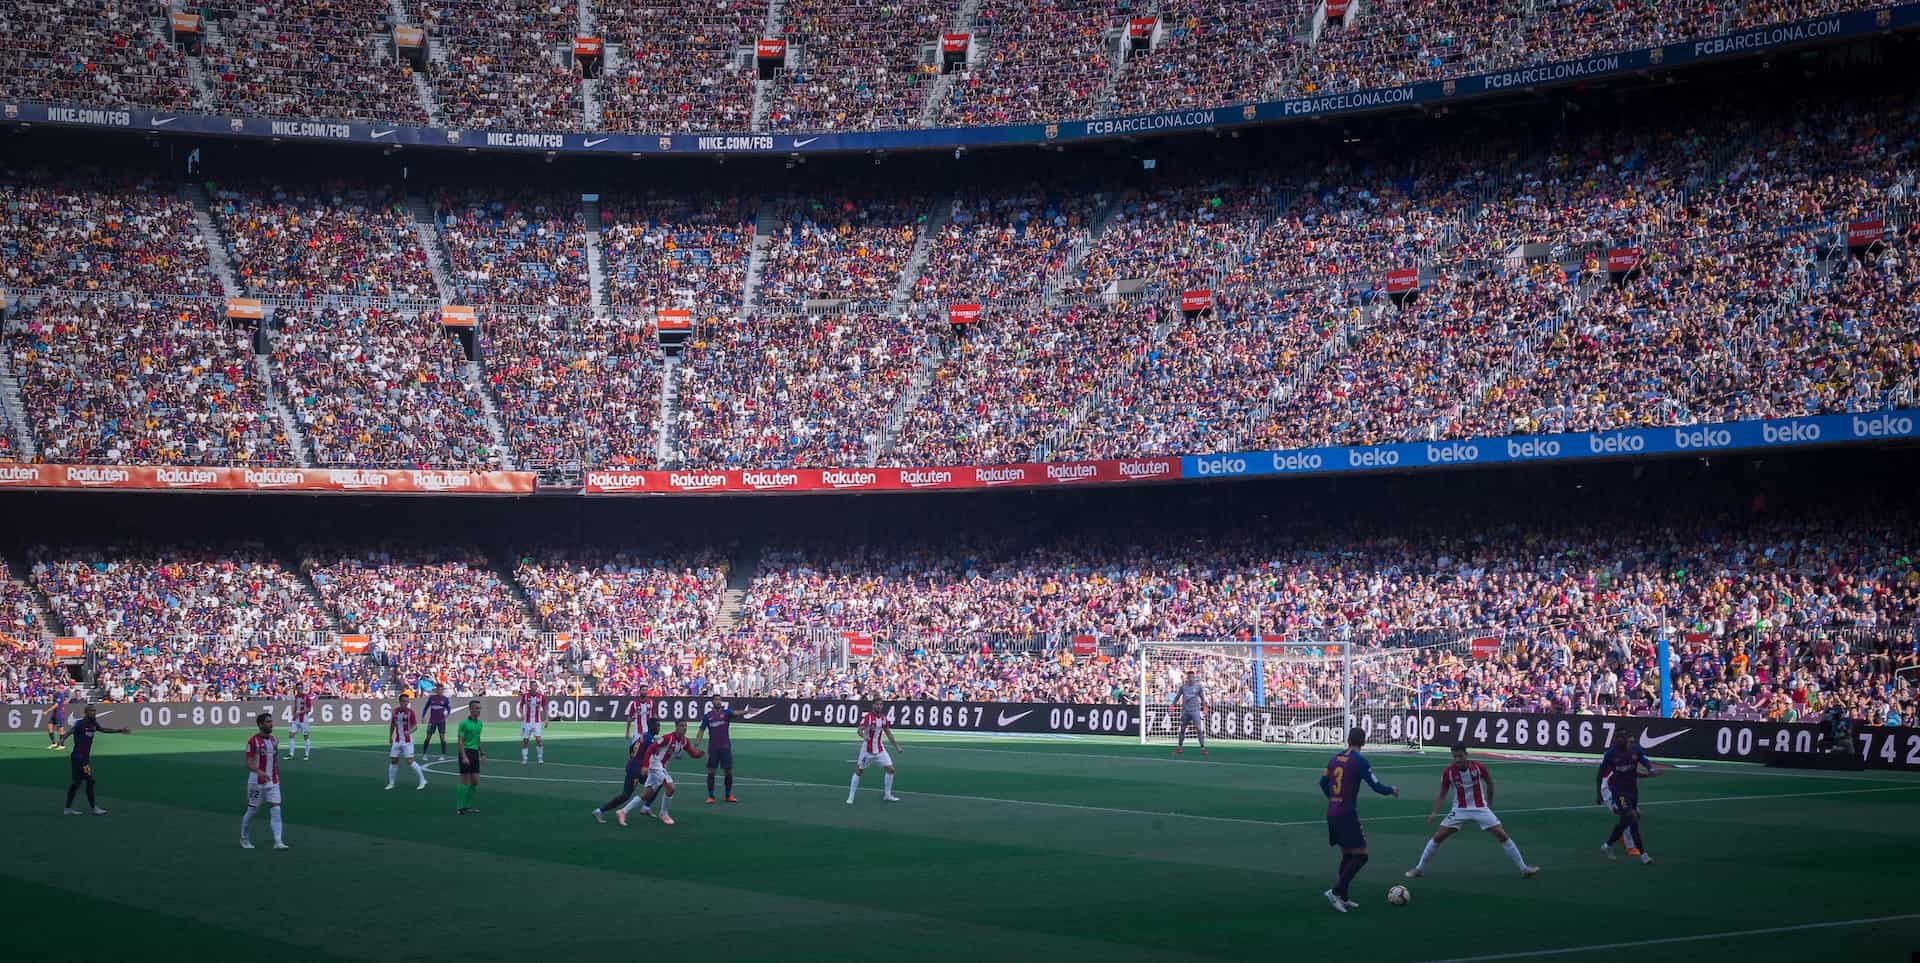 Large crowd of people sitting in the stands while soccer players play on the field at a soccer game in Spain.